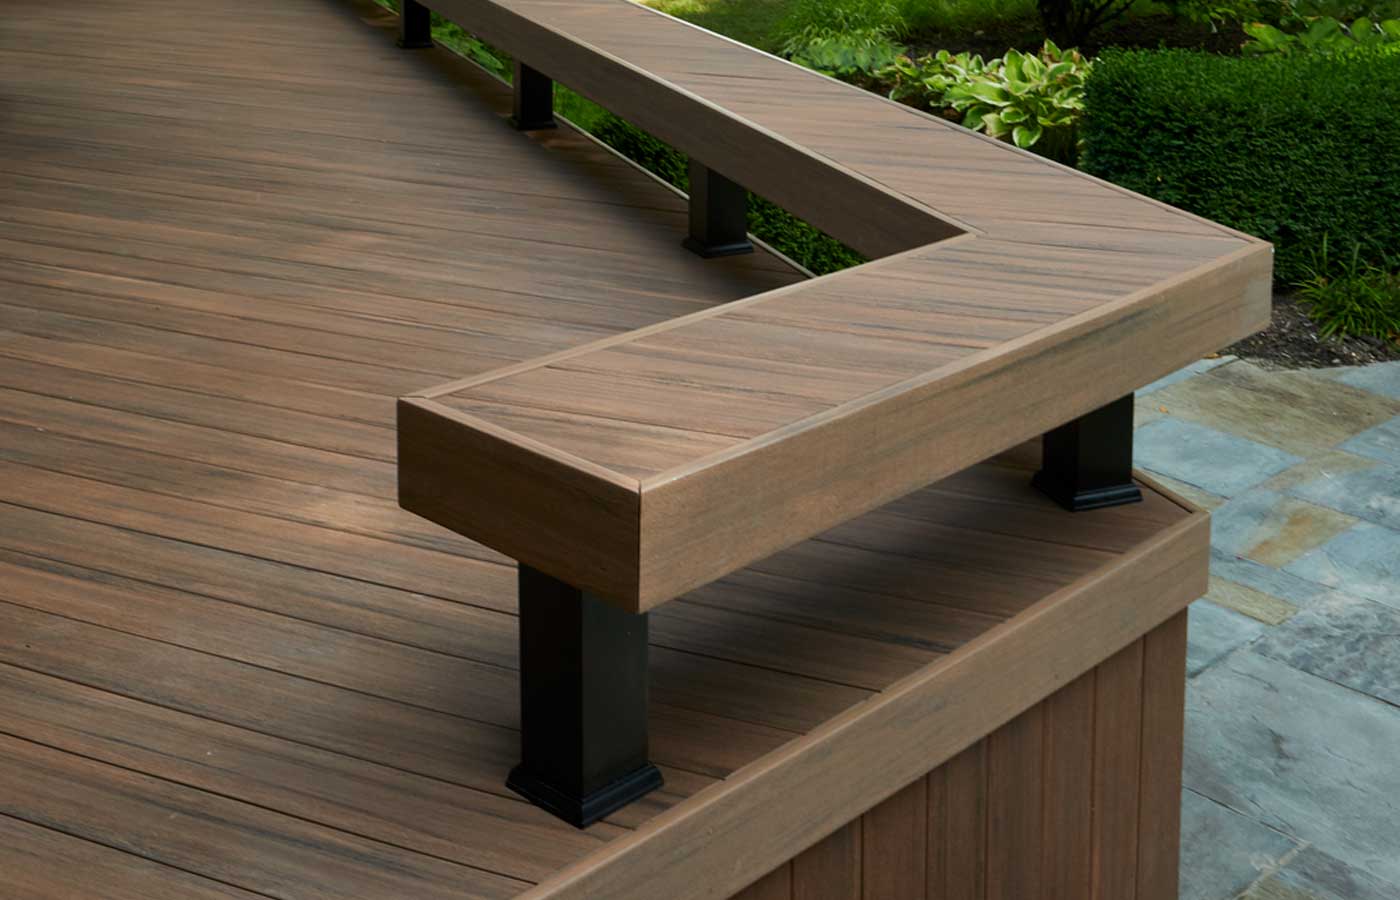 A close-up shot of a composite deck with diagonally laid deck boards. A built-in bench runs along the deck’s perimeter. Greenery surrounds the deck, suggesting it's built in a wooded area. The composite deck is made of English Walnut boards from the TimberTech Advanced PVC Vintage Collection.